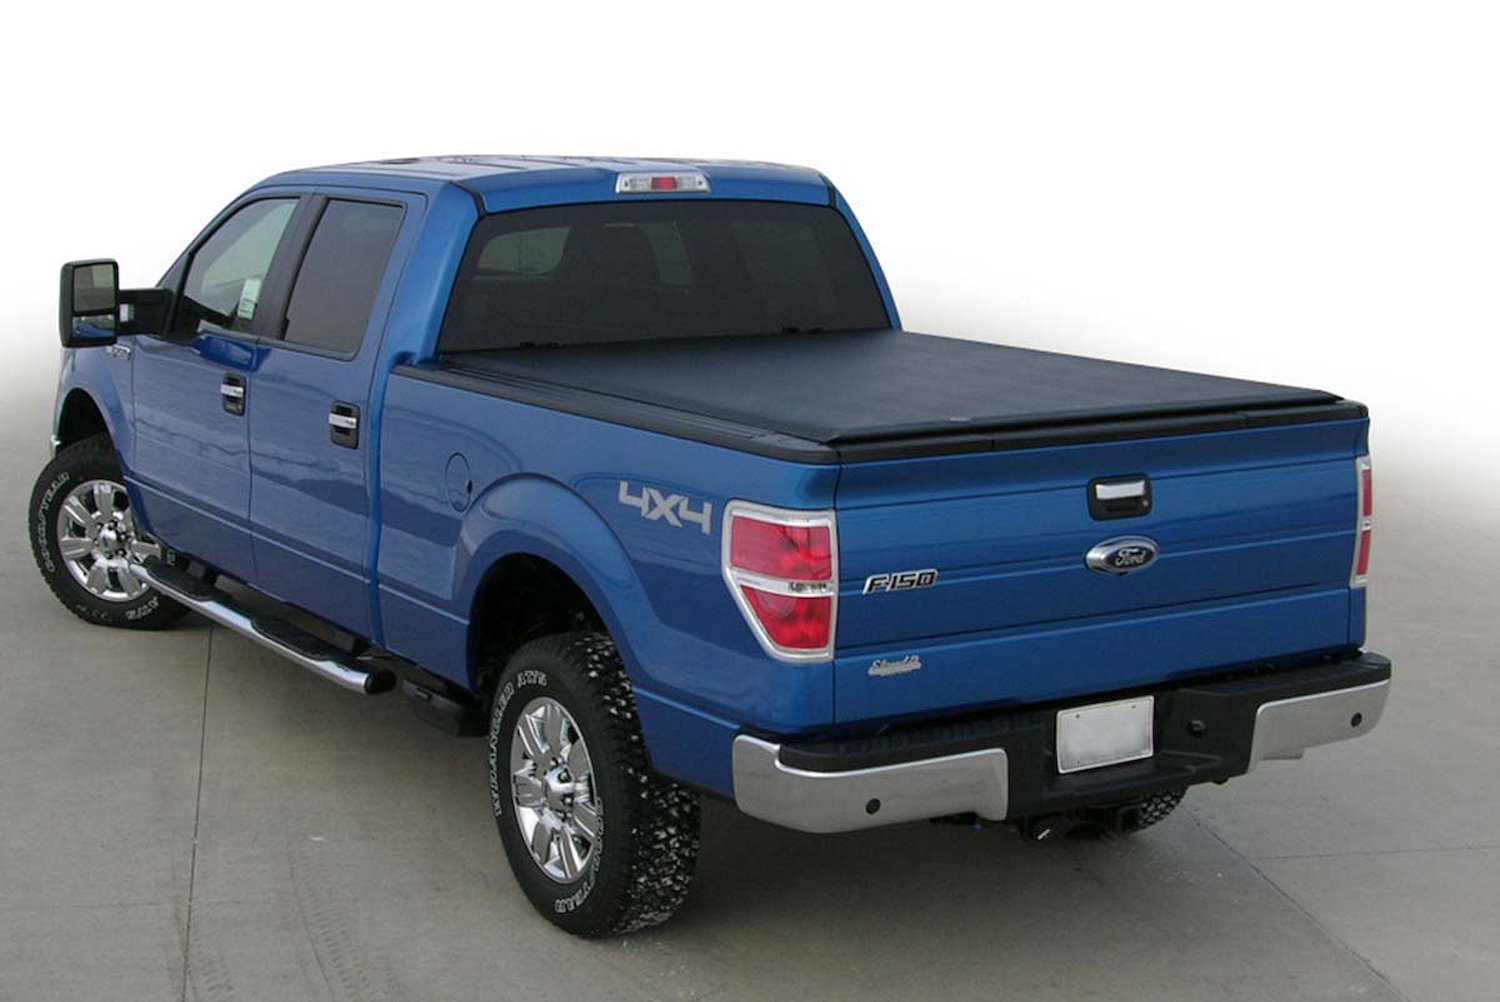 LORADO Roll-Up Tonneau Cover, Fits Select Ford Ranger, with 6 ft. Bed